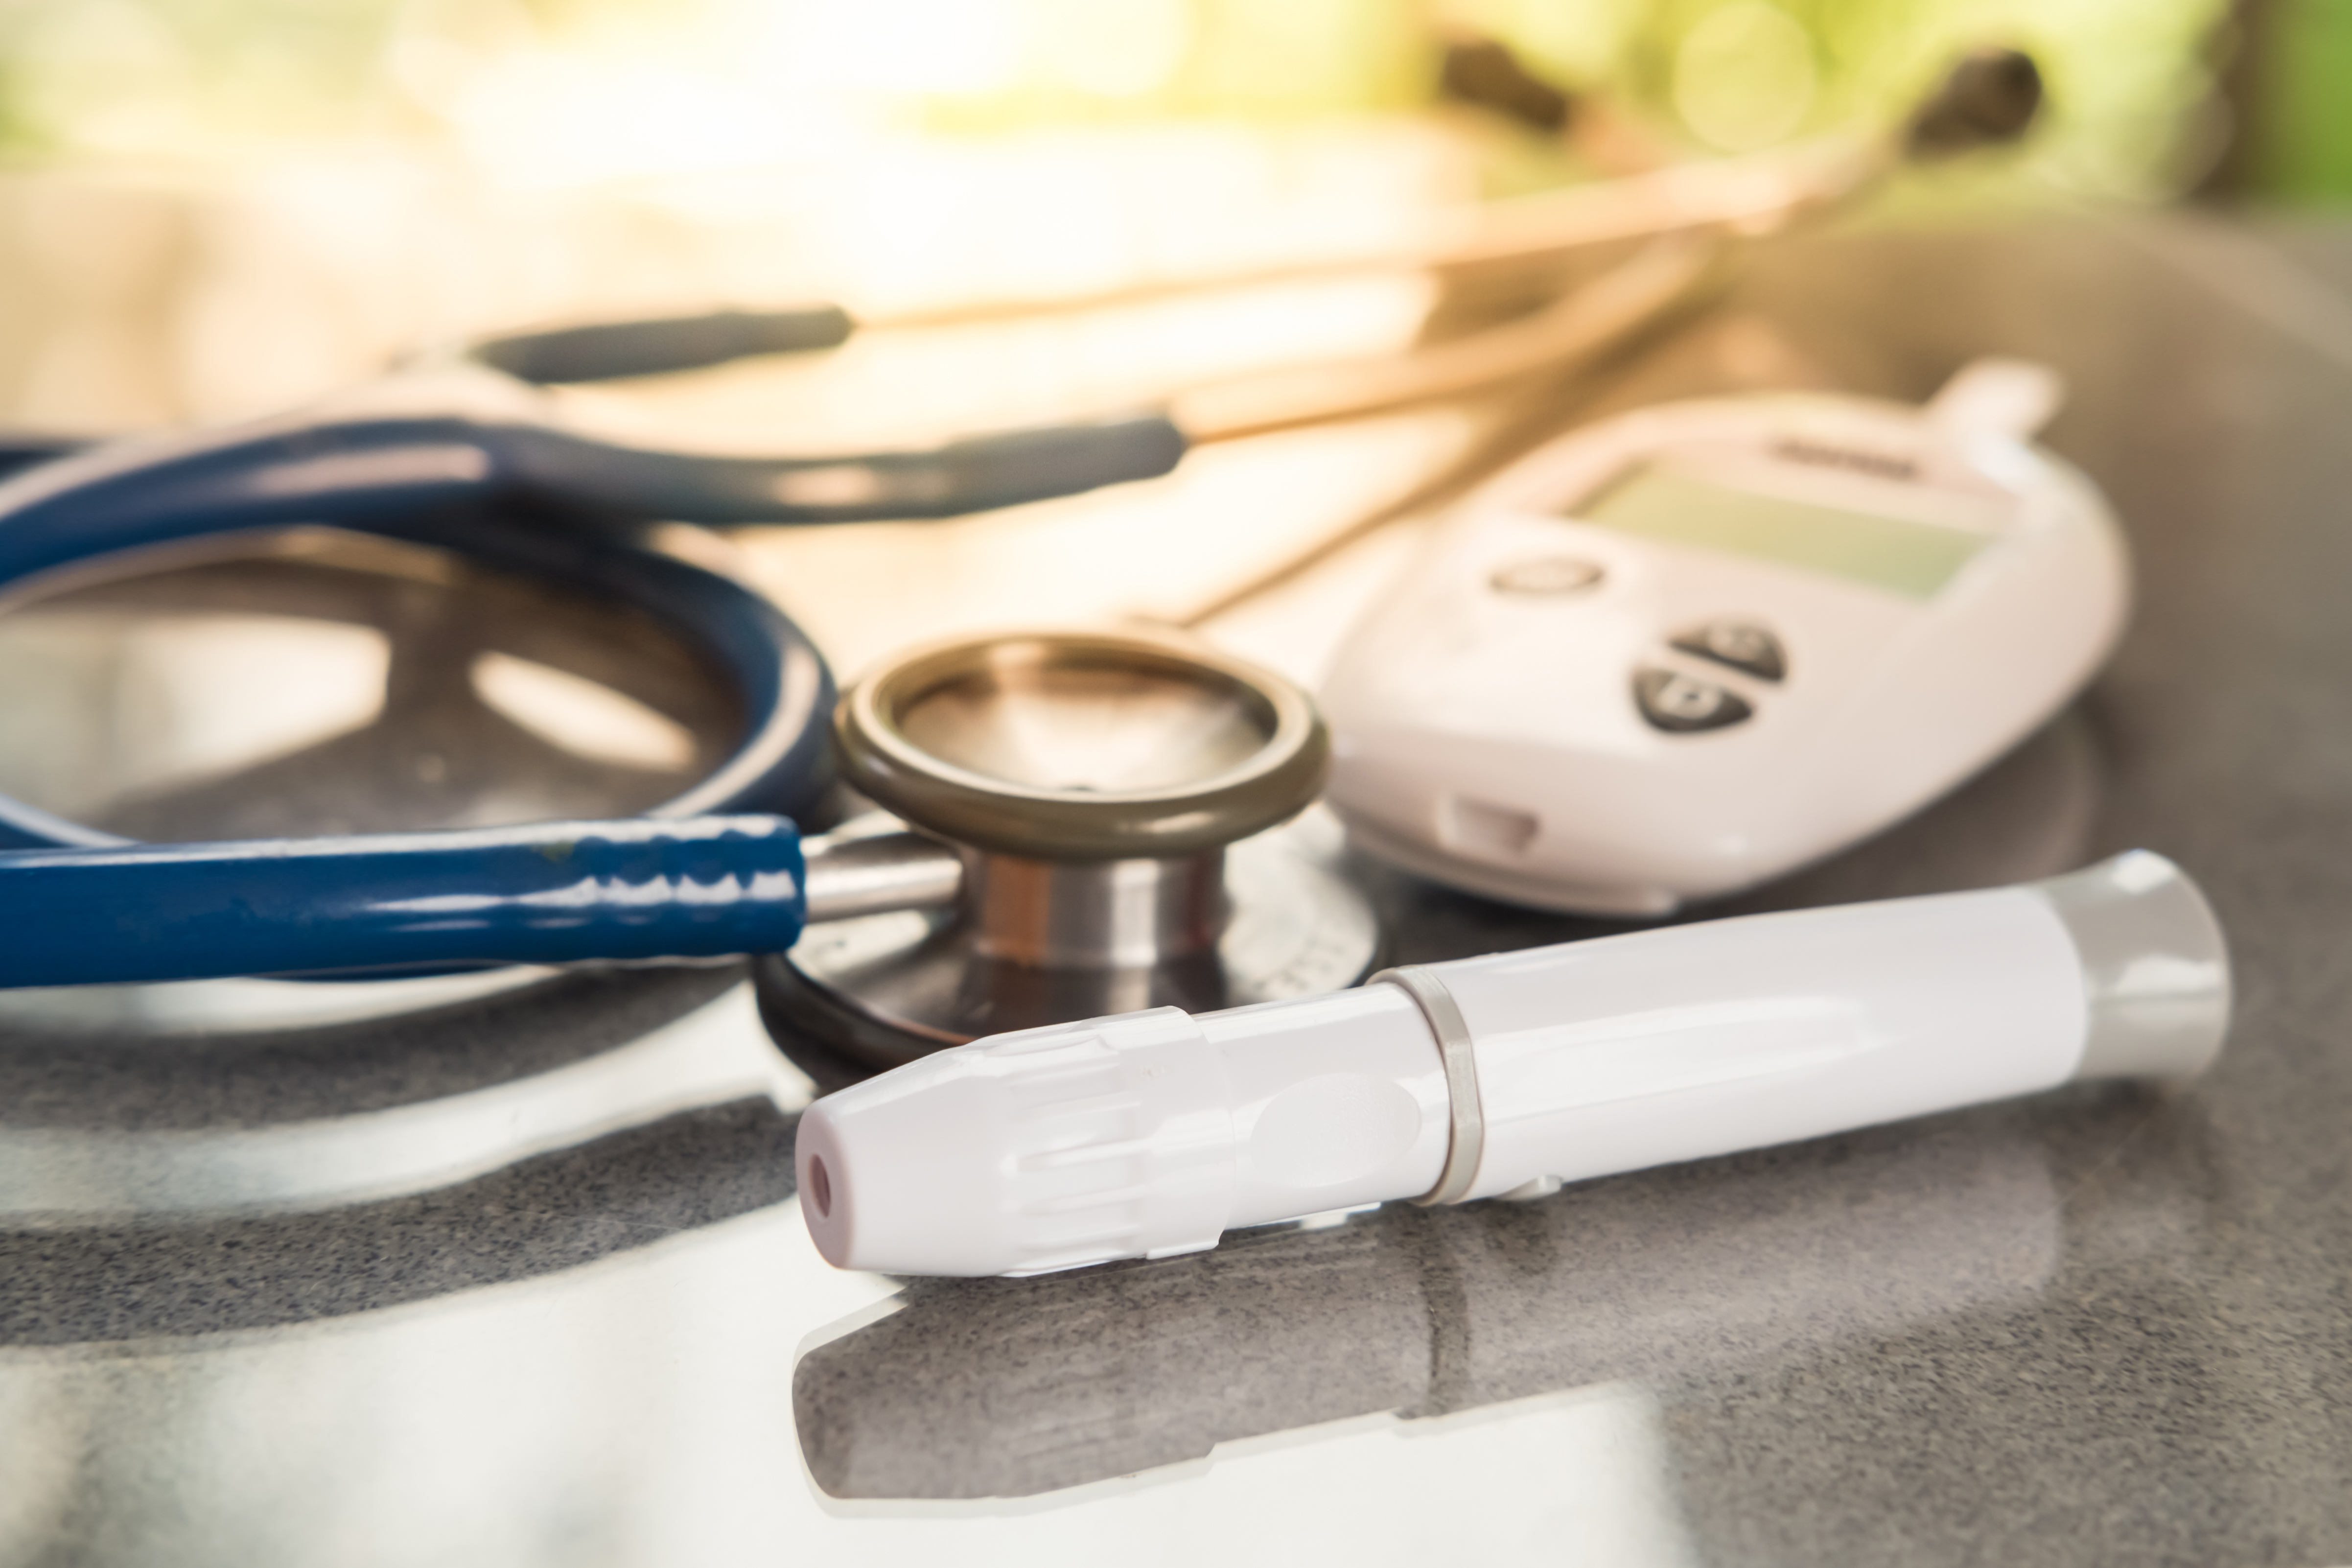 Stethoscope and diabetes blood glucose meter